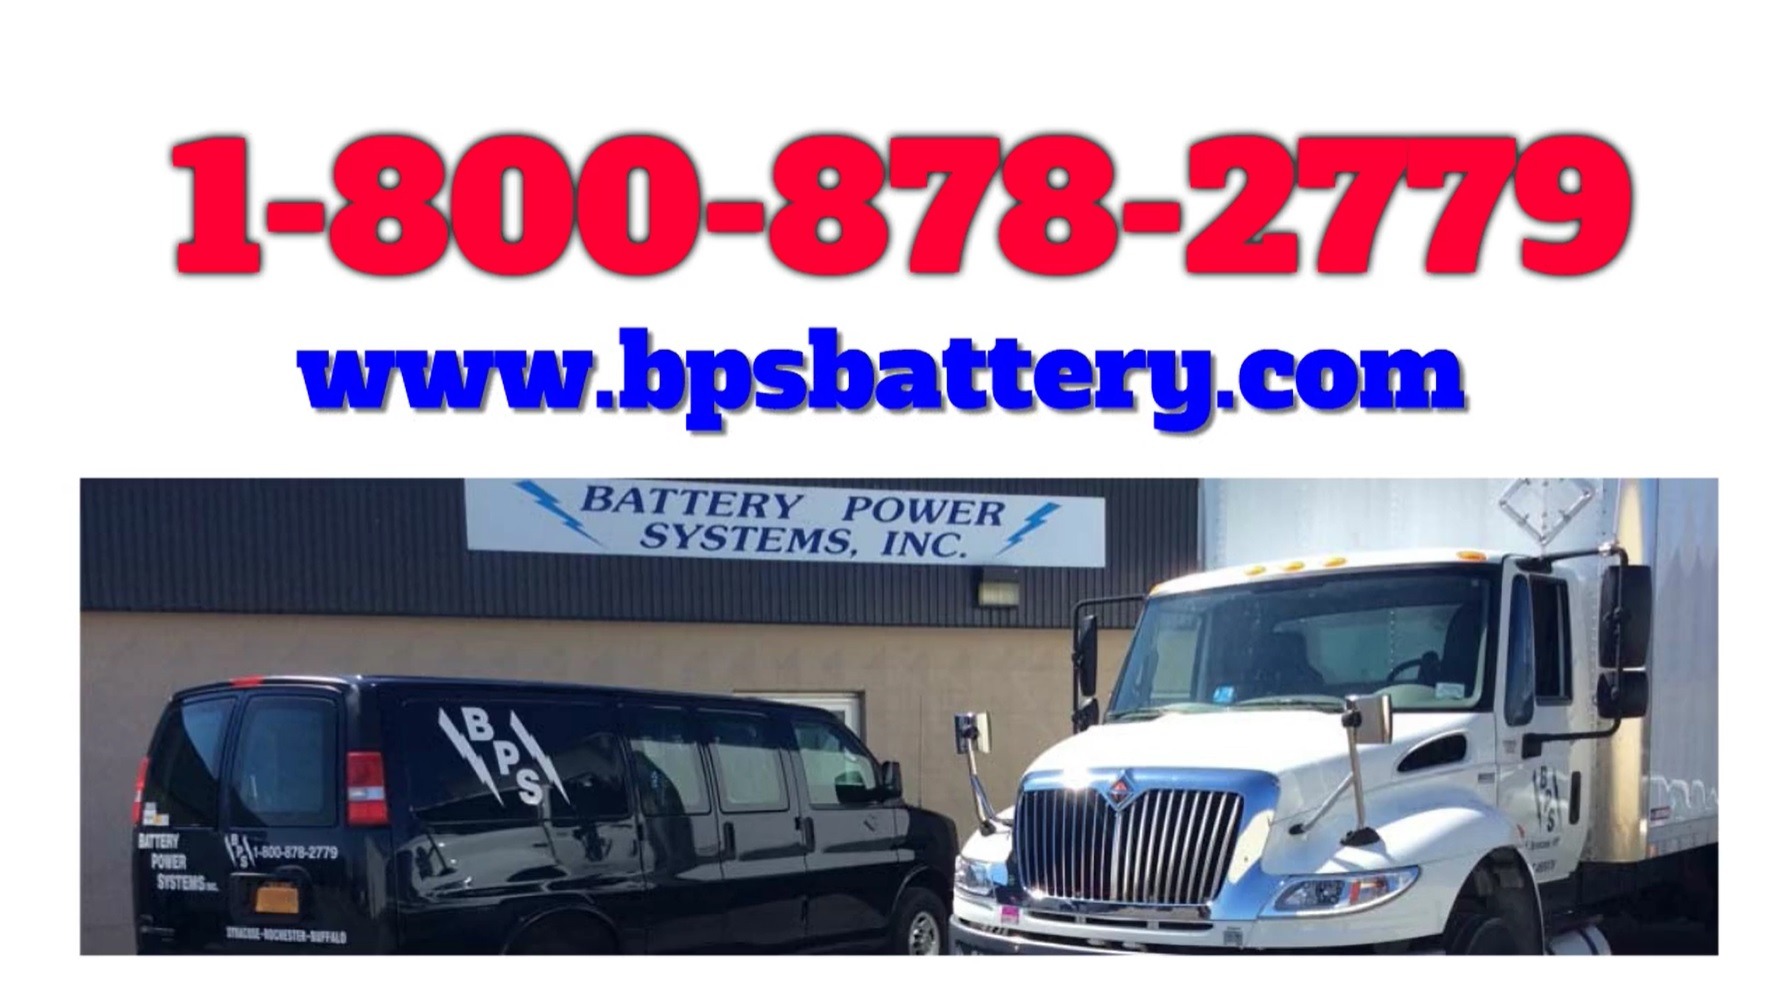 BPS Battery Power Systems